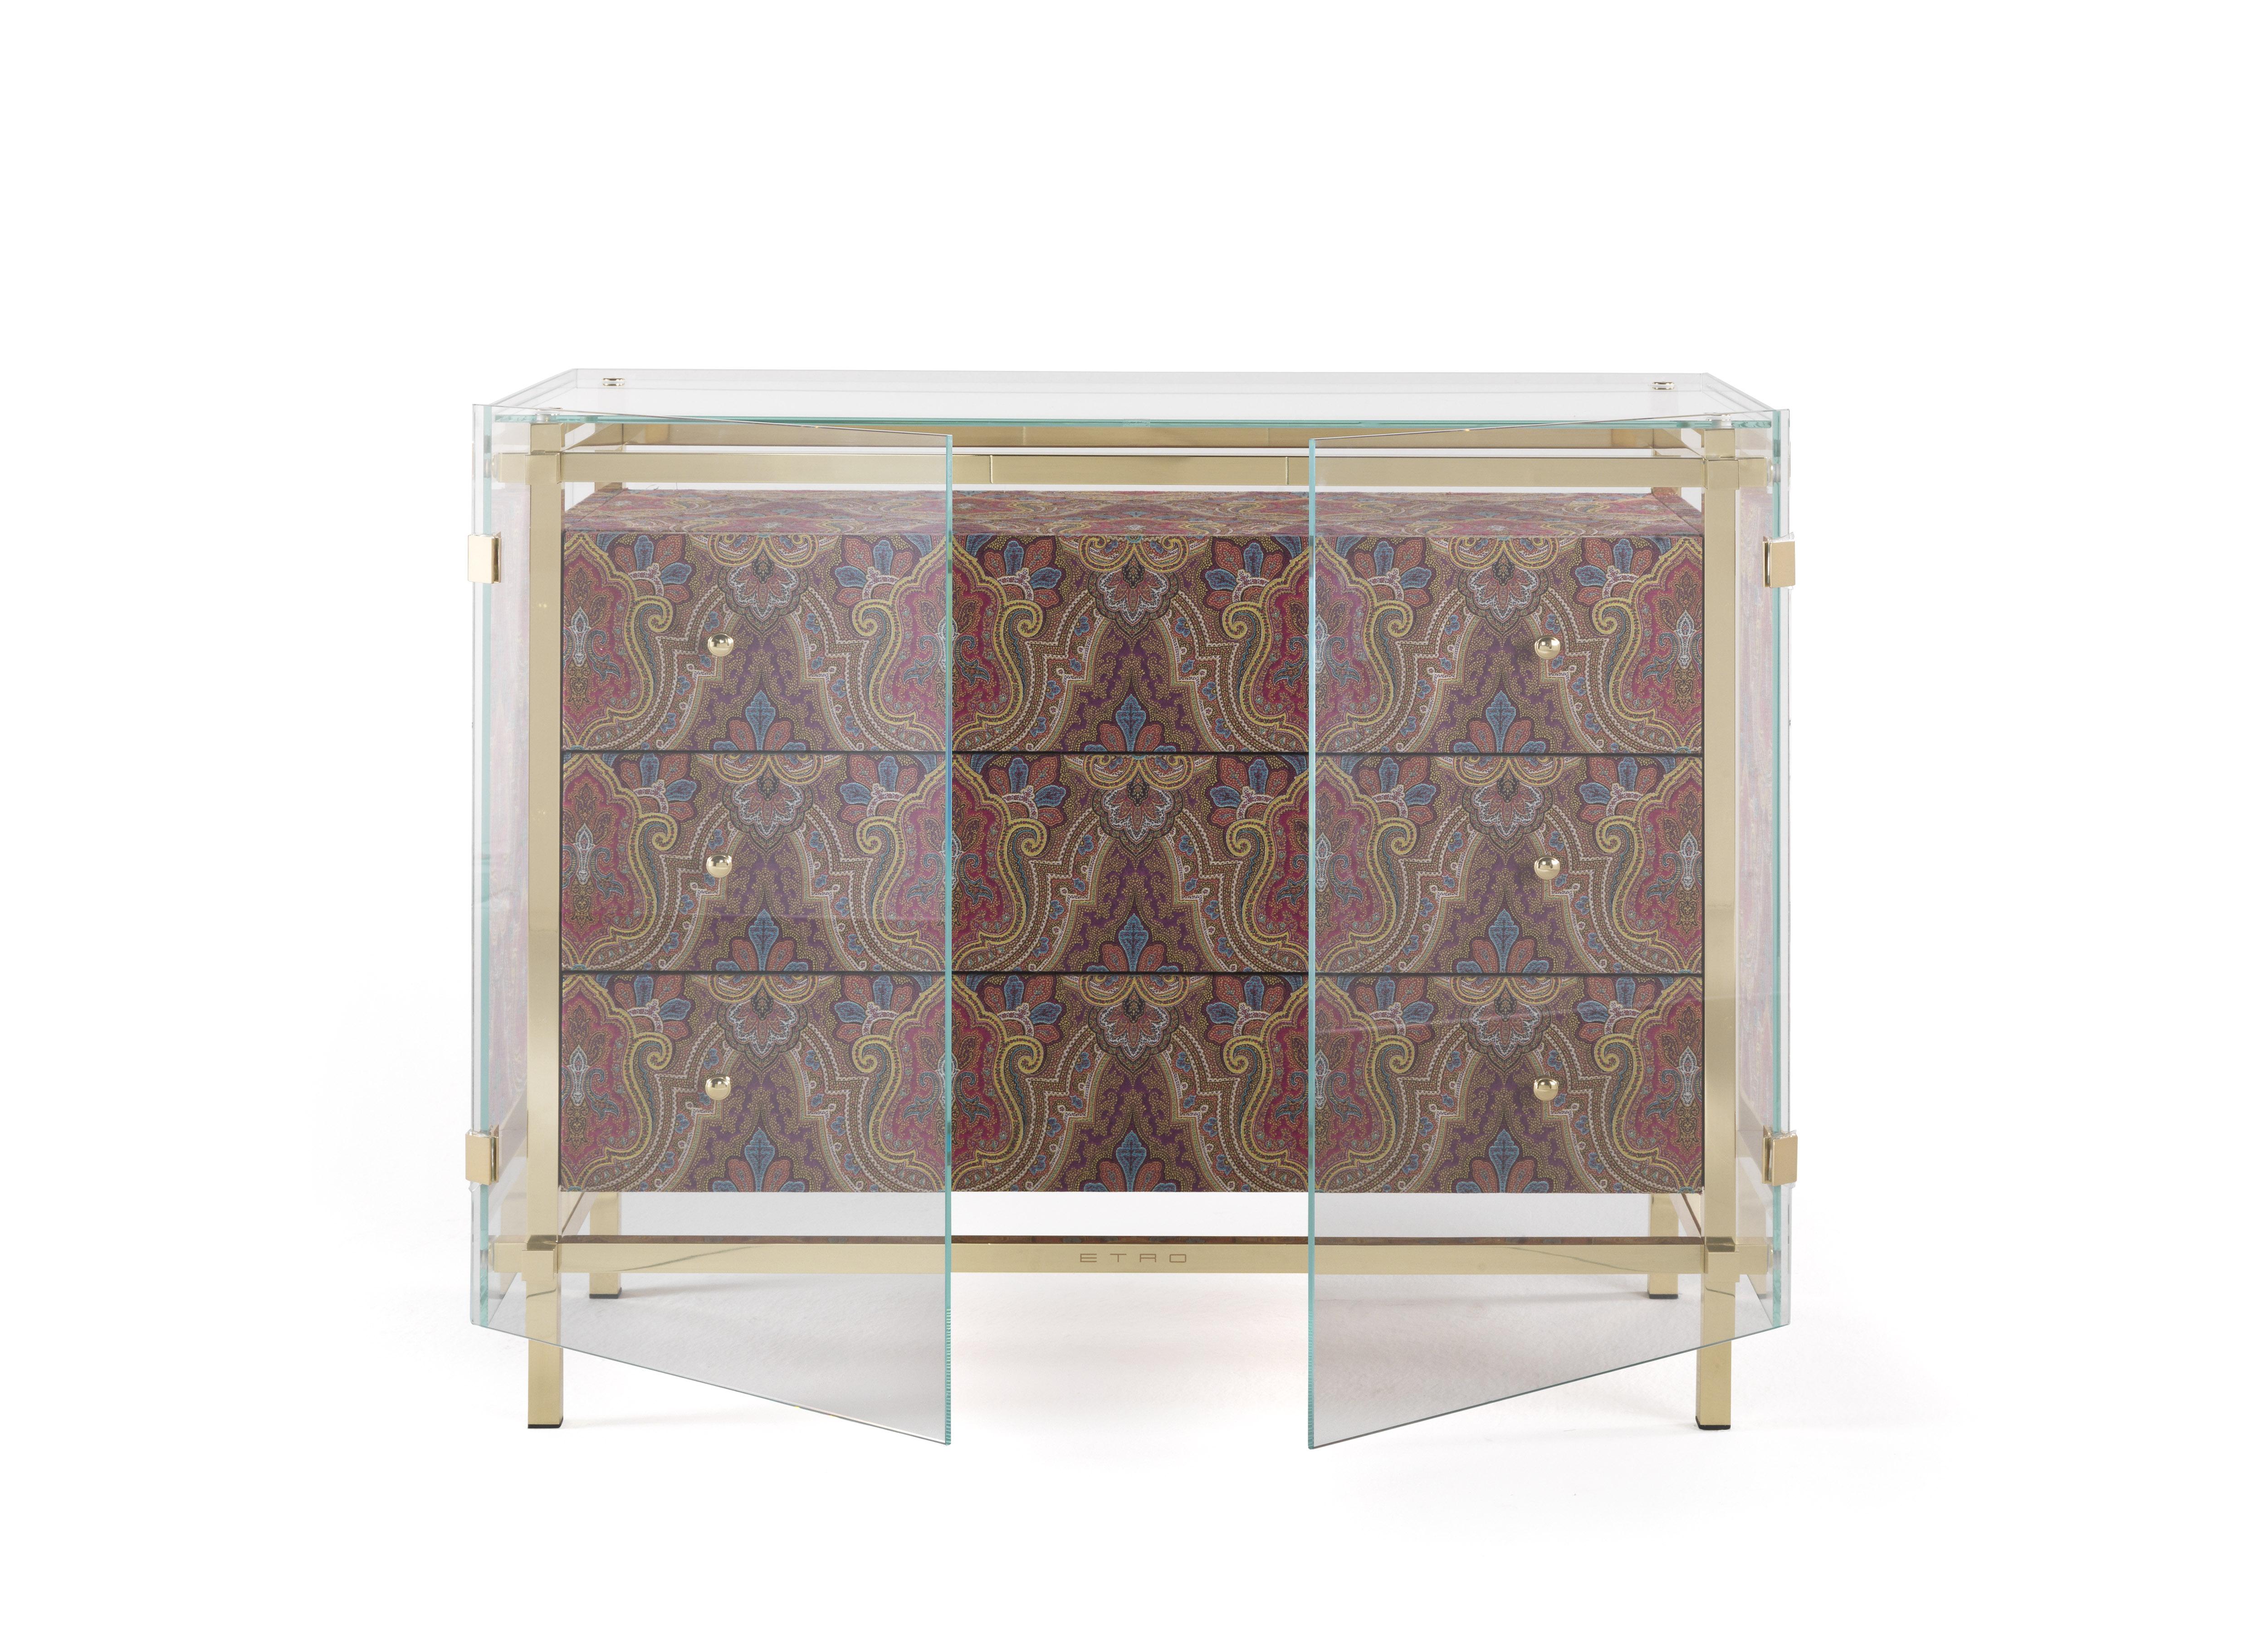 An impactful chest of drawers featuring a precious upholstery in fabric from the Etro Home Interiors collection with oriental inspired decorative motives and outer extraclear tempered glass. A mystic and transcendent element with an ethereal and